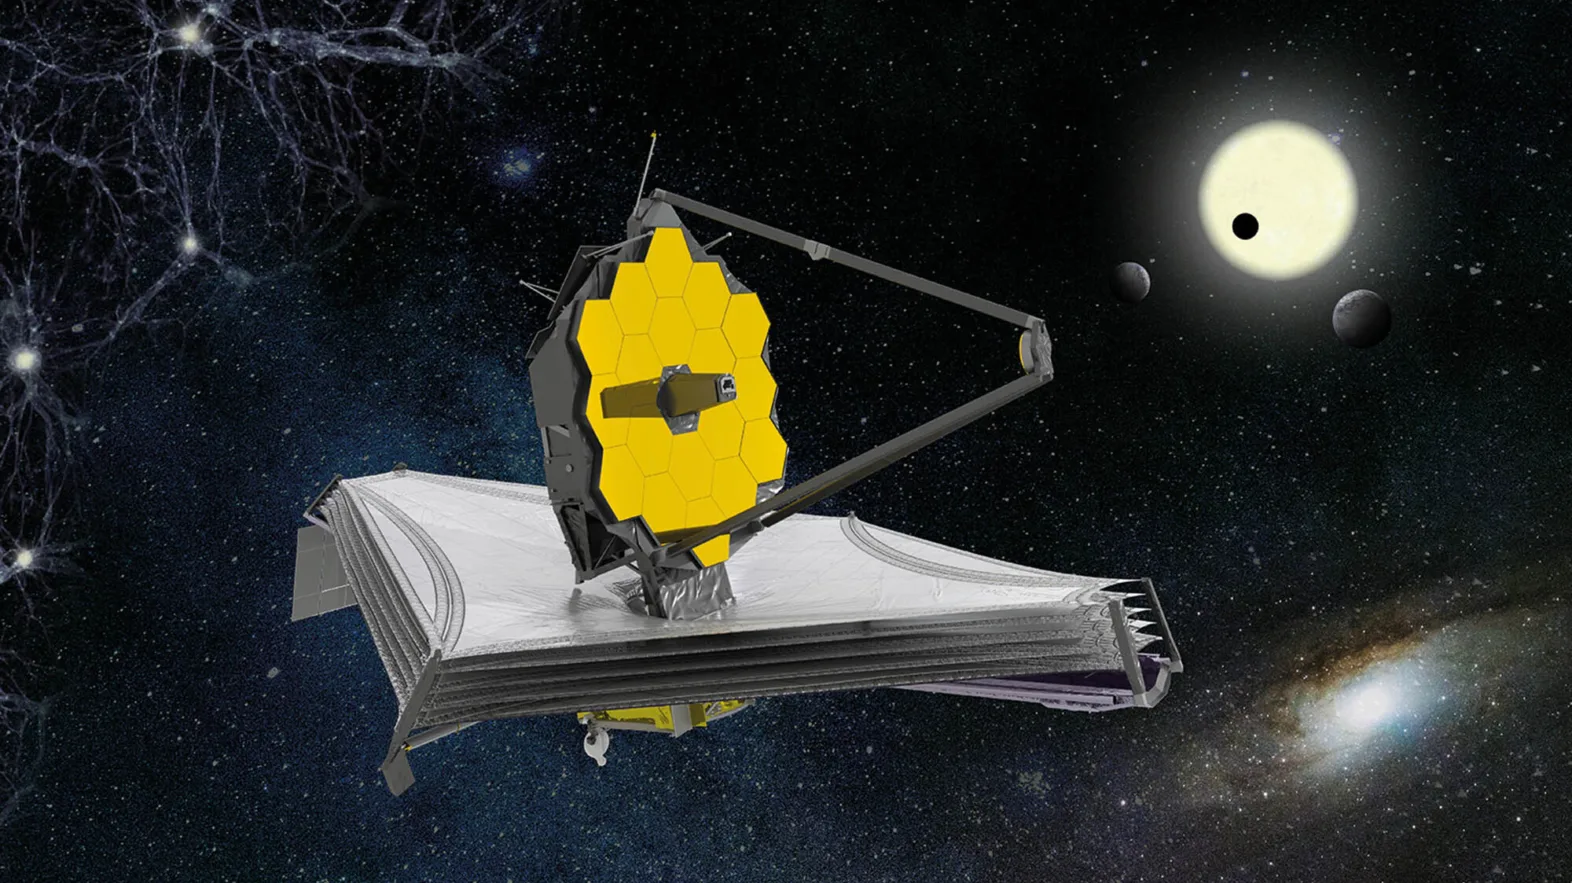 Image of the space telescope in space